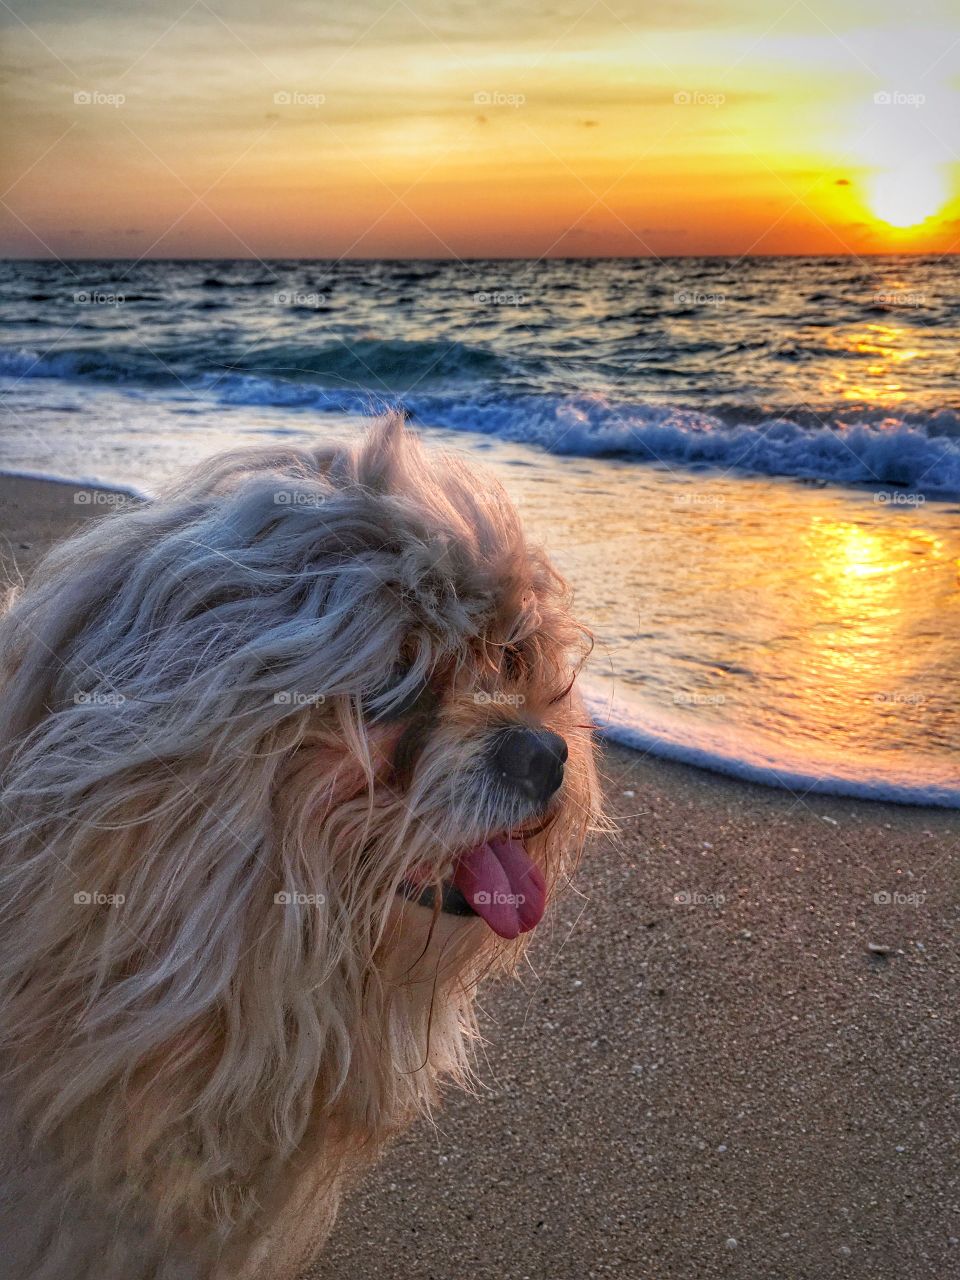 Dog sticking out tongue at beach during sunset